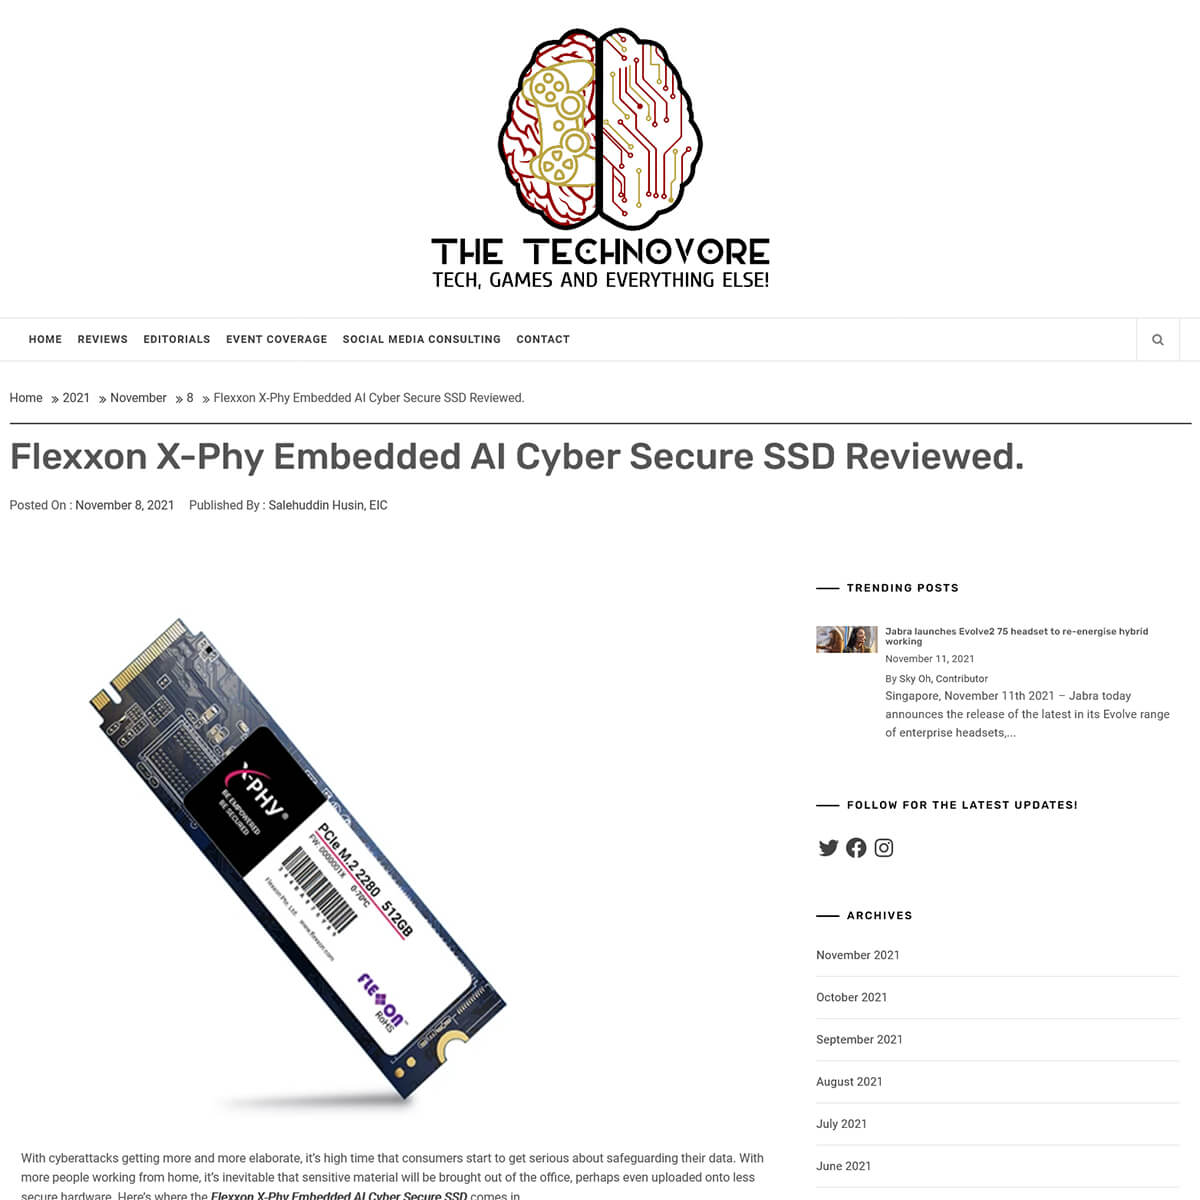 Flexxon-X-Phy-Embedded-AI-Cyber-Secure-SSD-Reviewed---The-Technovore